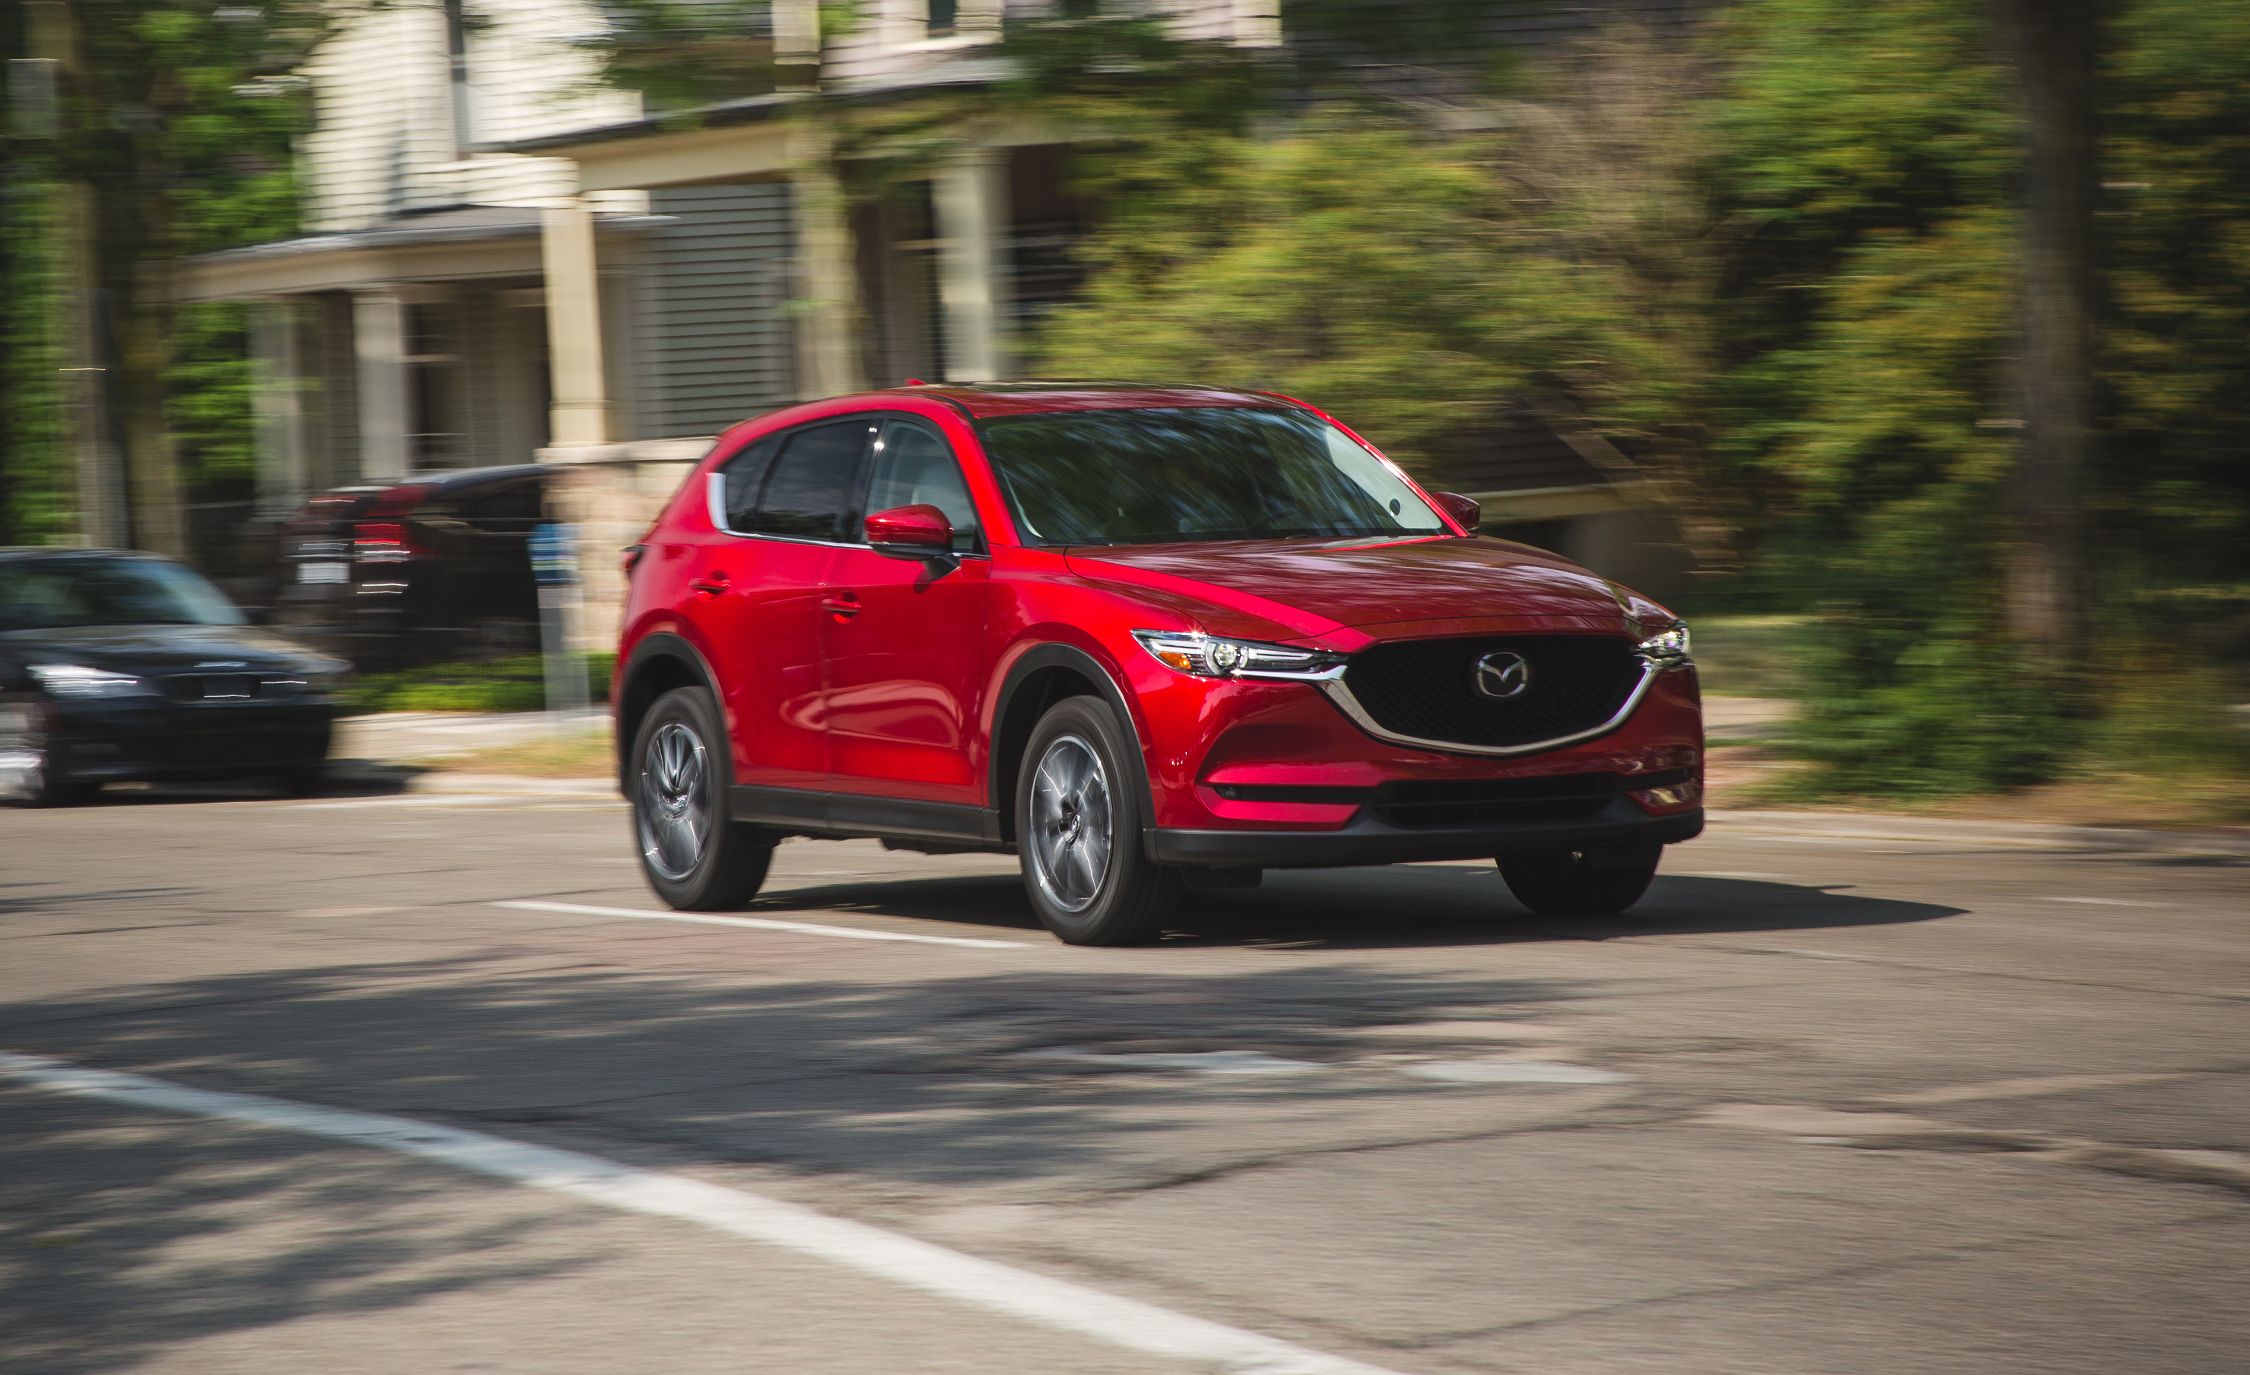 2017 Mazda Cx 5 Awd Instrumented Test Review Car And Driver